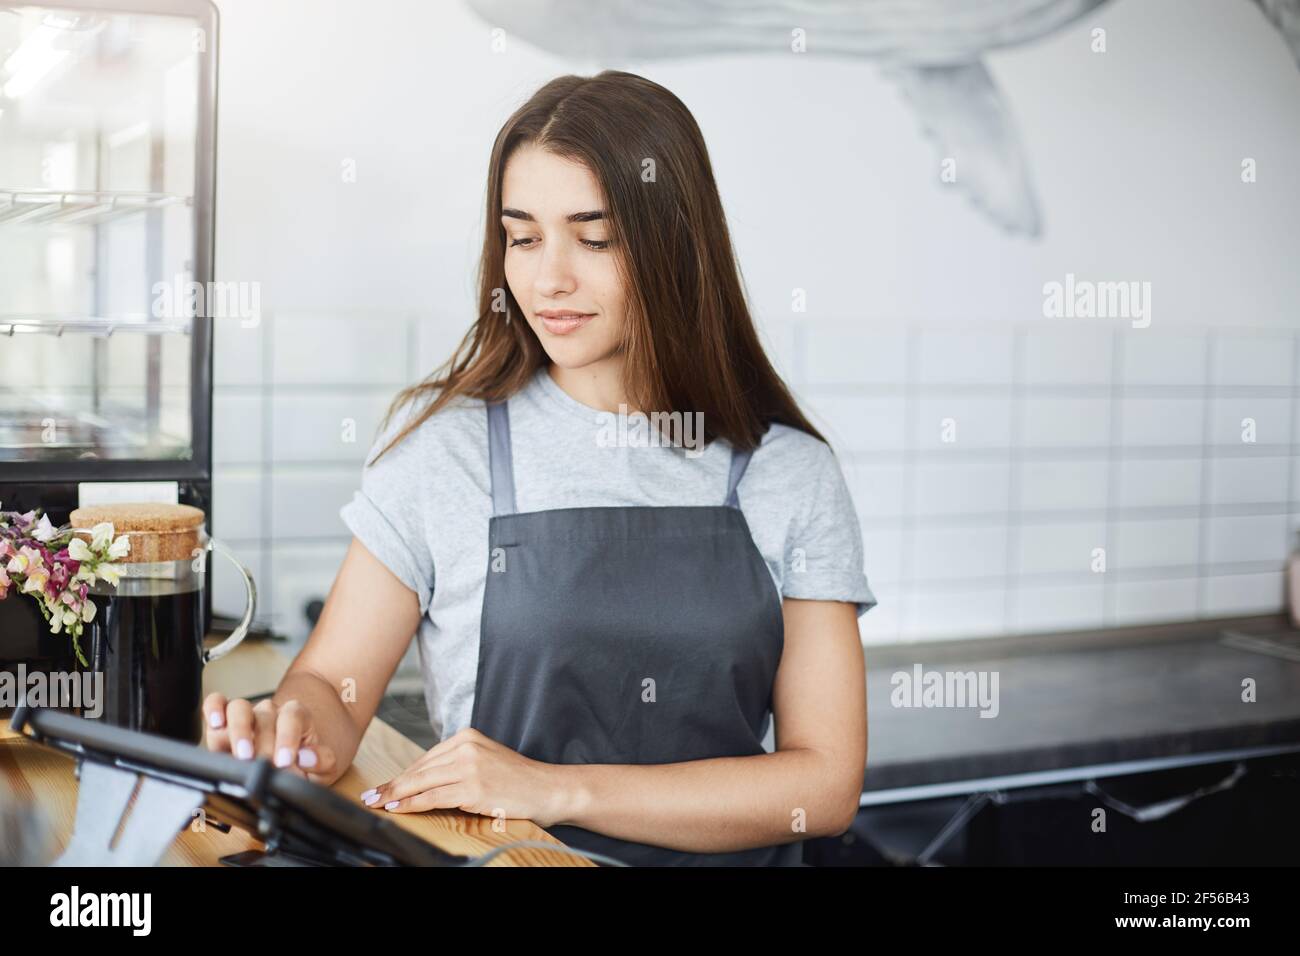 Portrait of beautiful long haired girl barista using a point of sale to run her successful coffee store business. Stock Photo